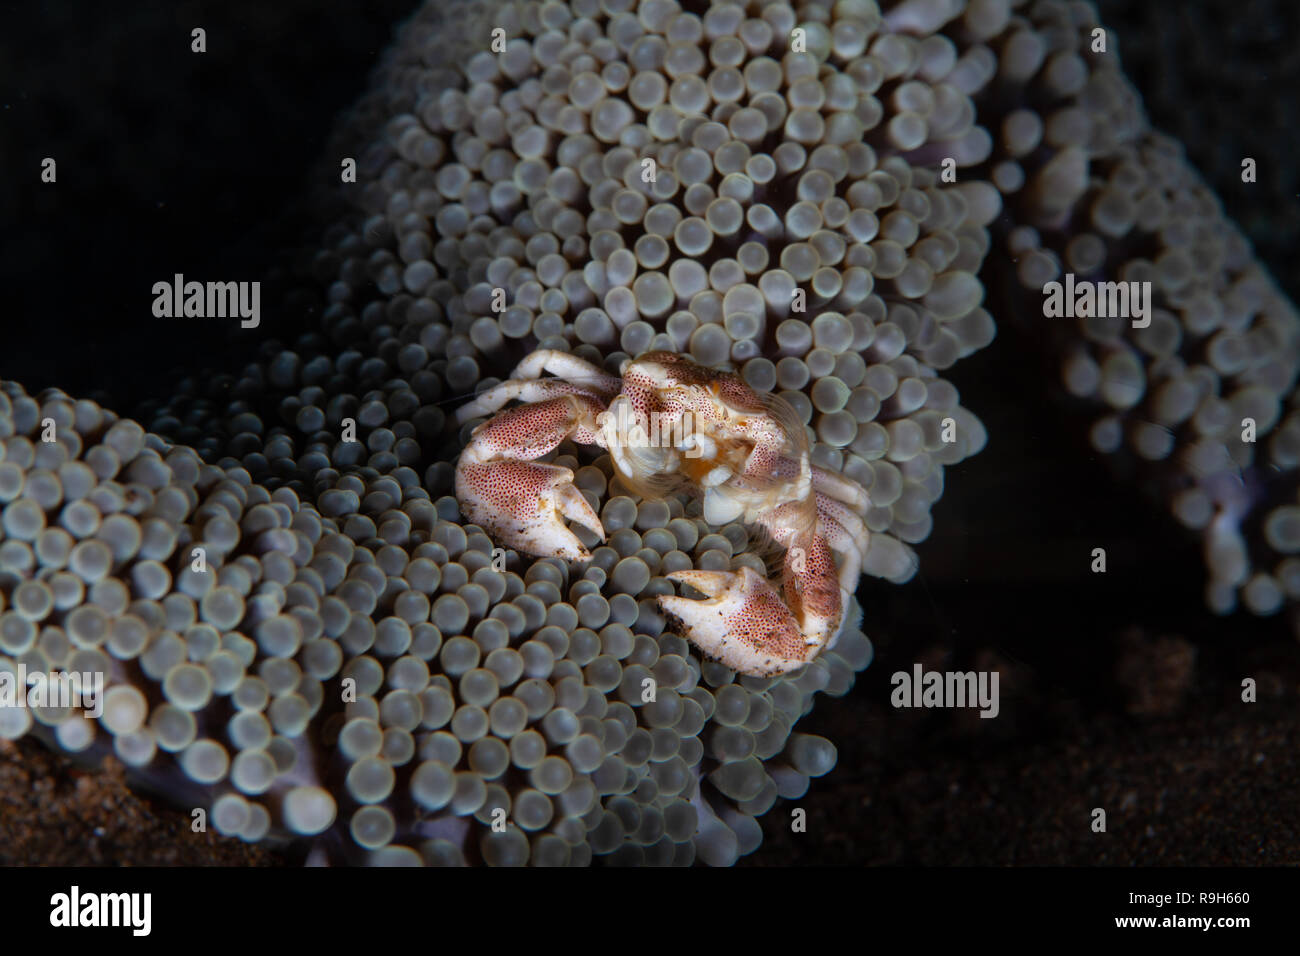 Porcelain crabs are delicate crustaceans found mostly in tropical waters.They are quite often seen on coral reefs within or on top of a host Anemone. Stock Photo